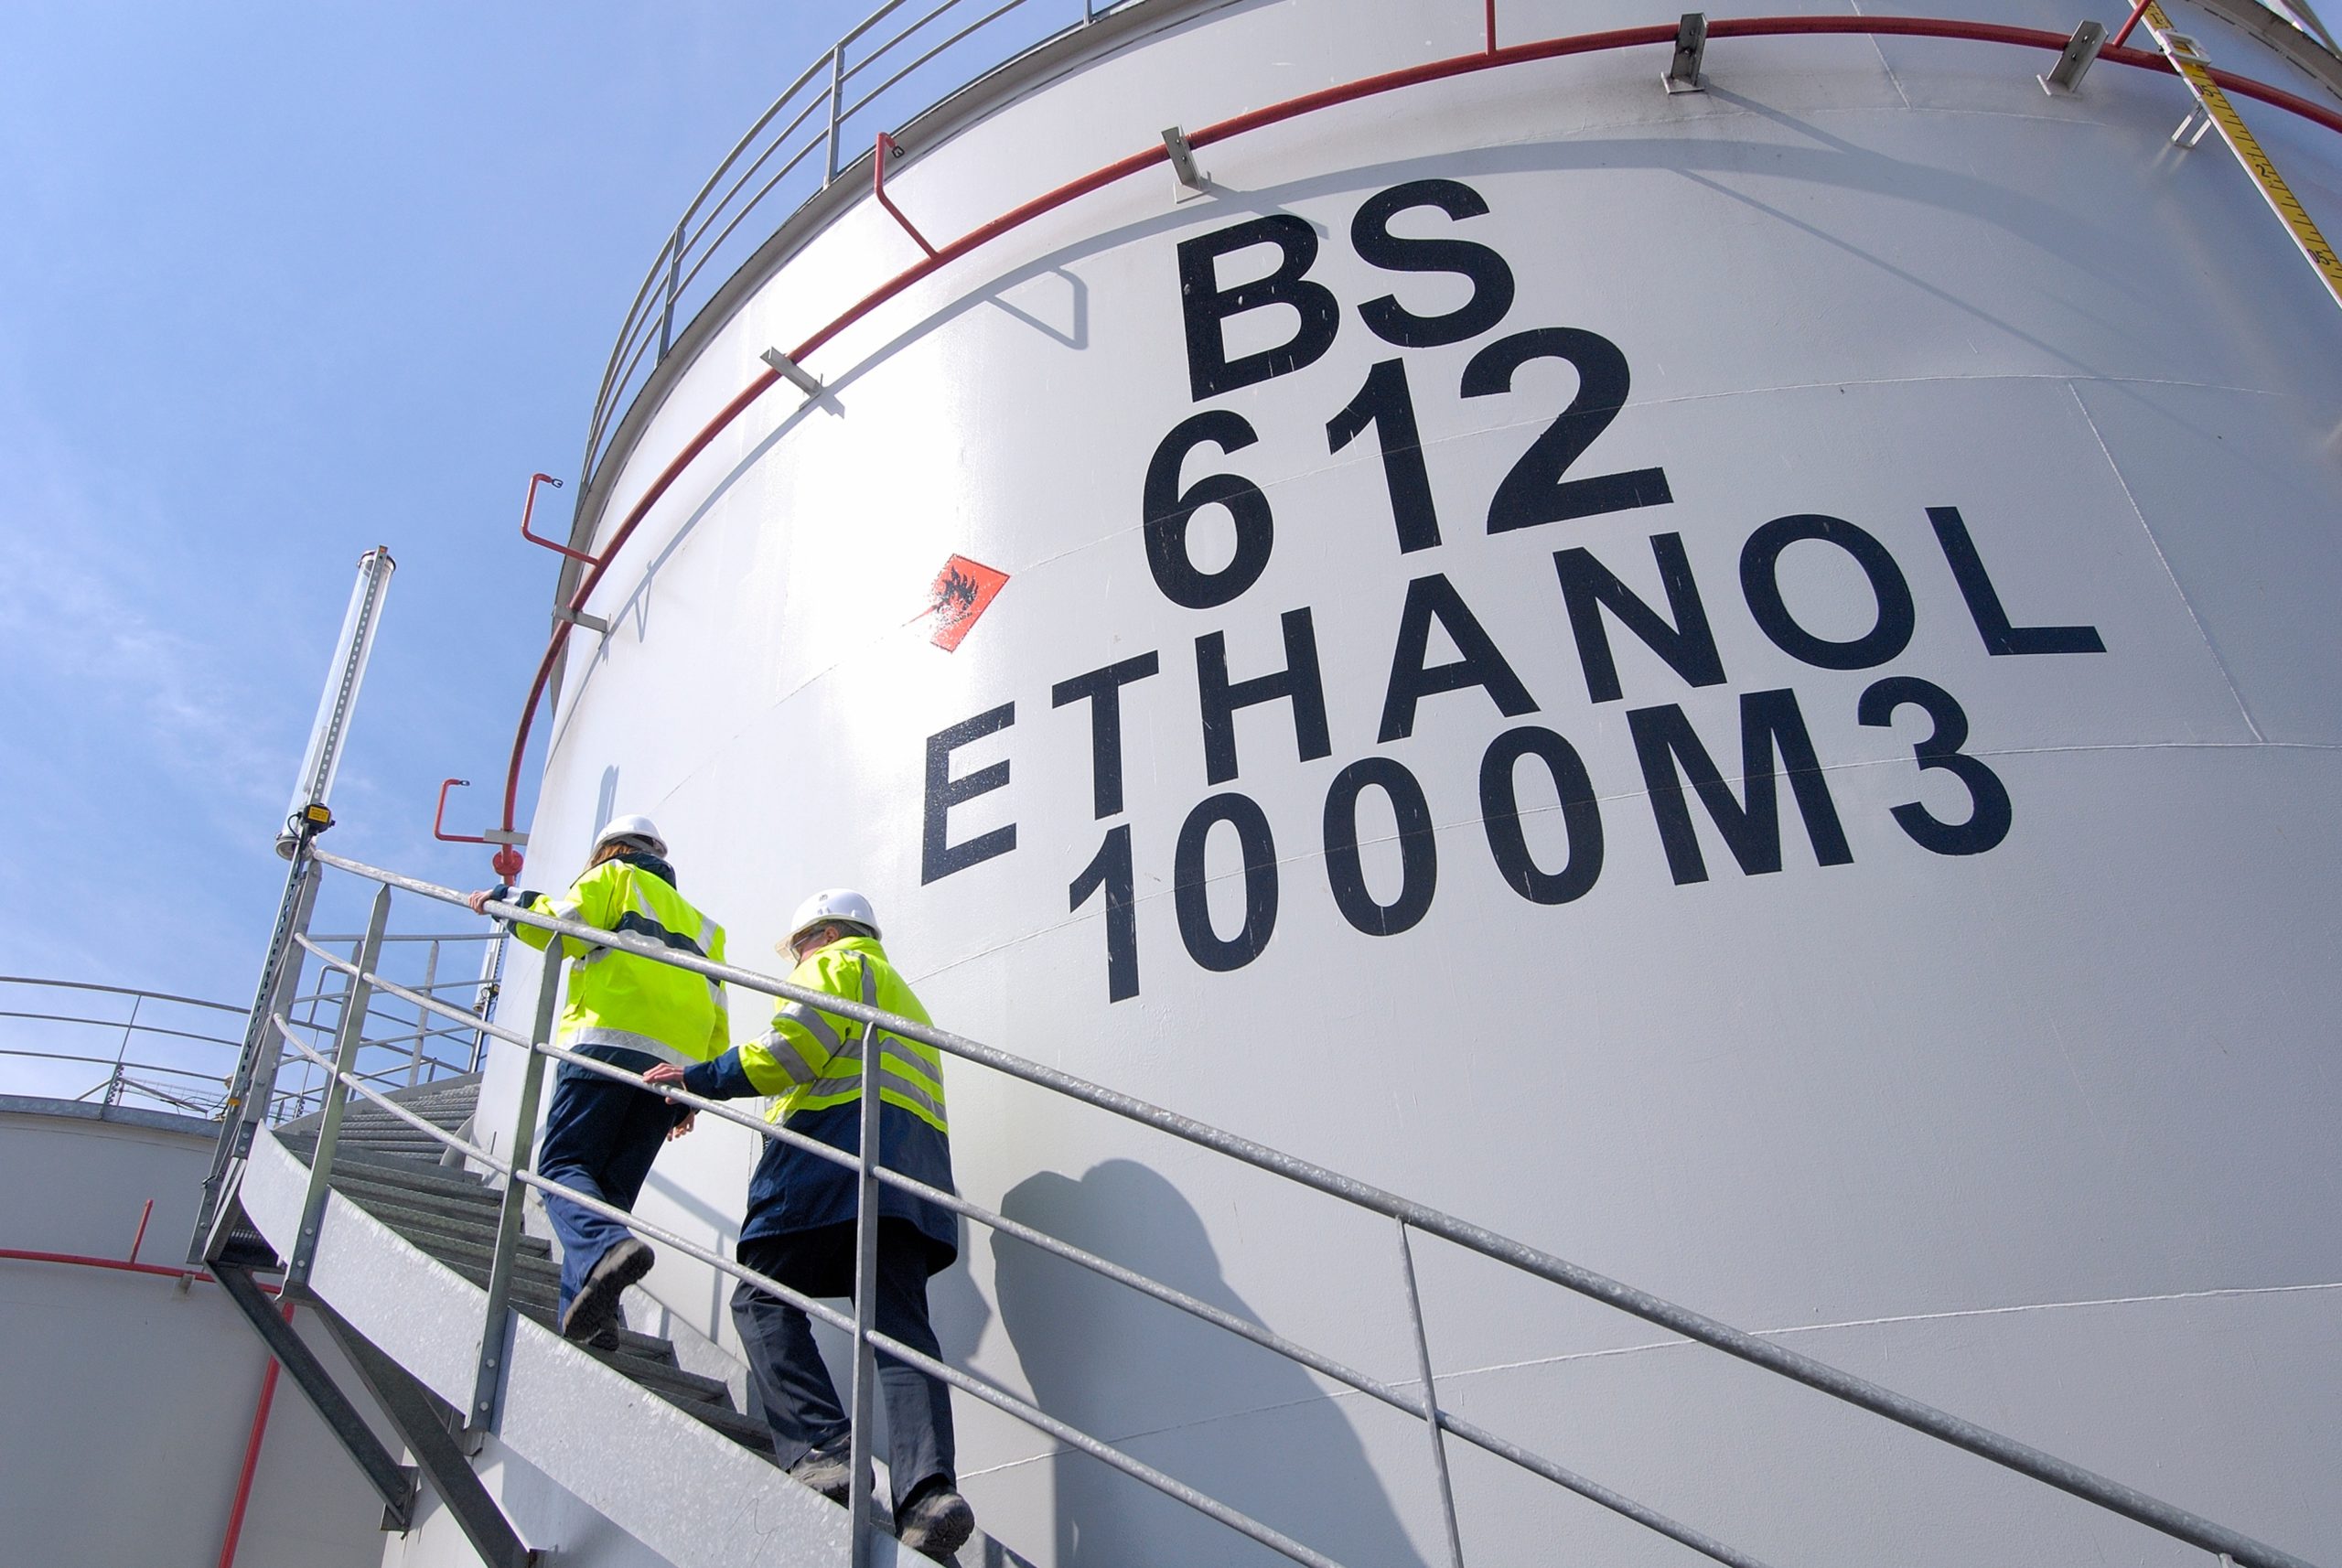 European Commission Predicts Growing Demand for Renewable Ethanol